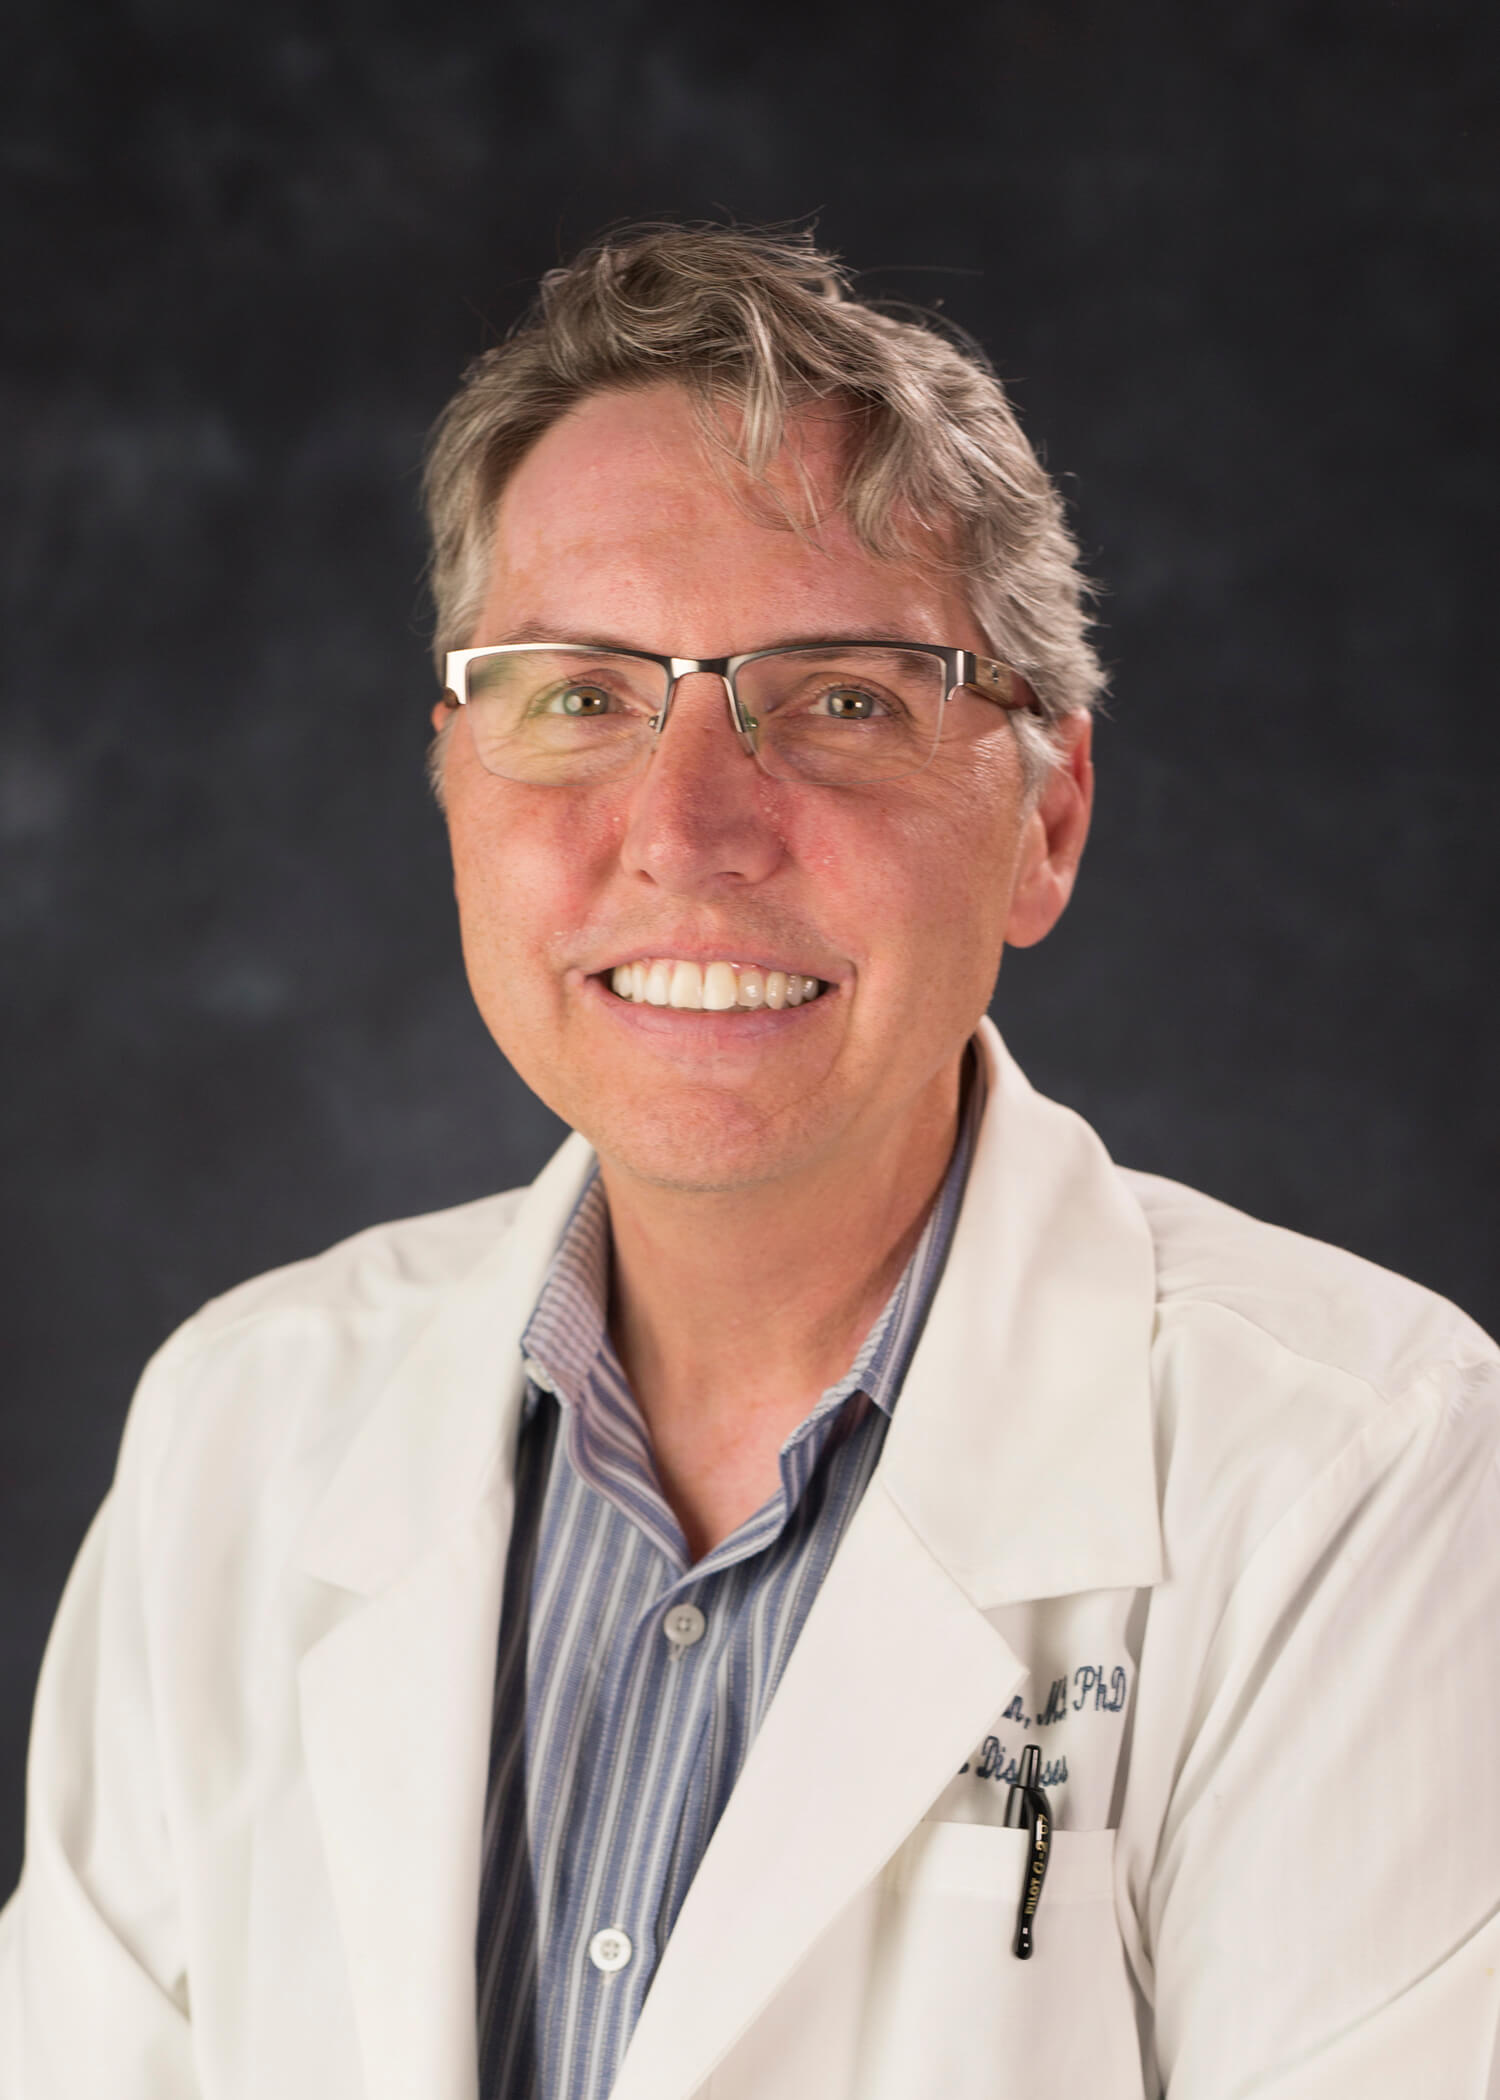 Photo of Jonathan Moorman, MD, PhD, FACP Professor, Vice Chair of Research and Scholarship, Vice Chair of Education, 